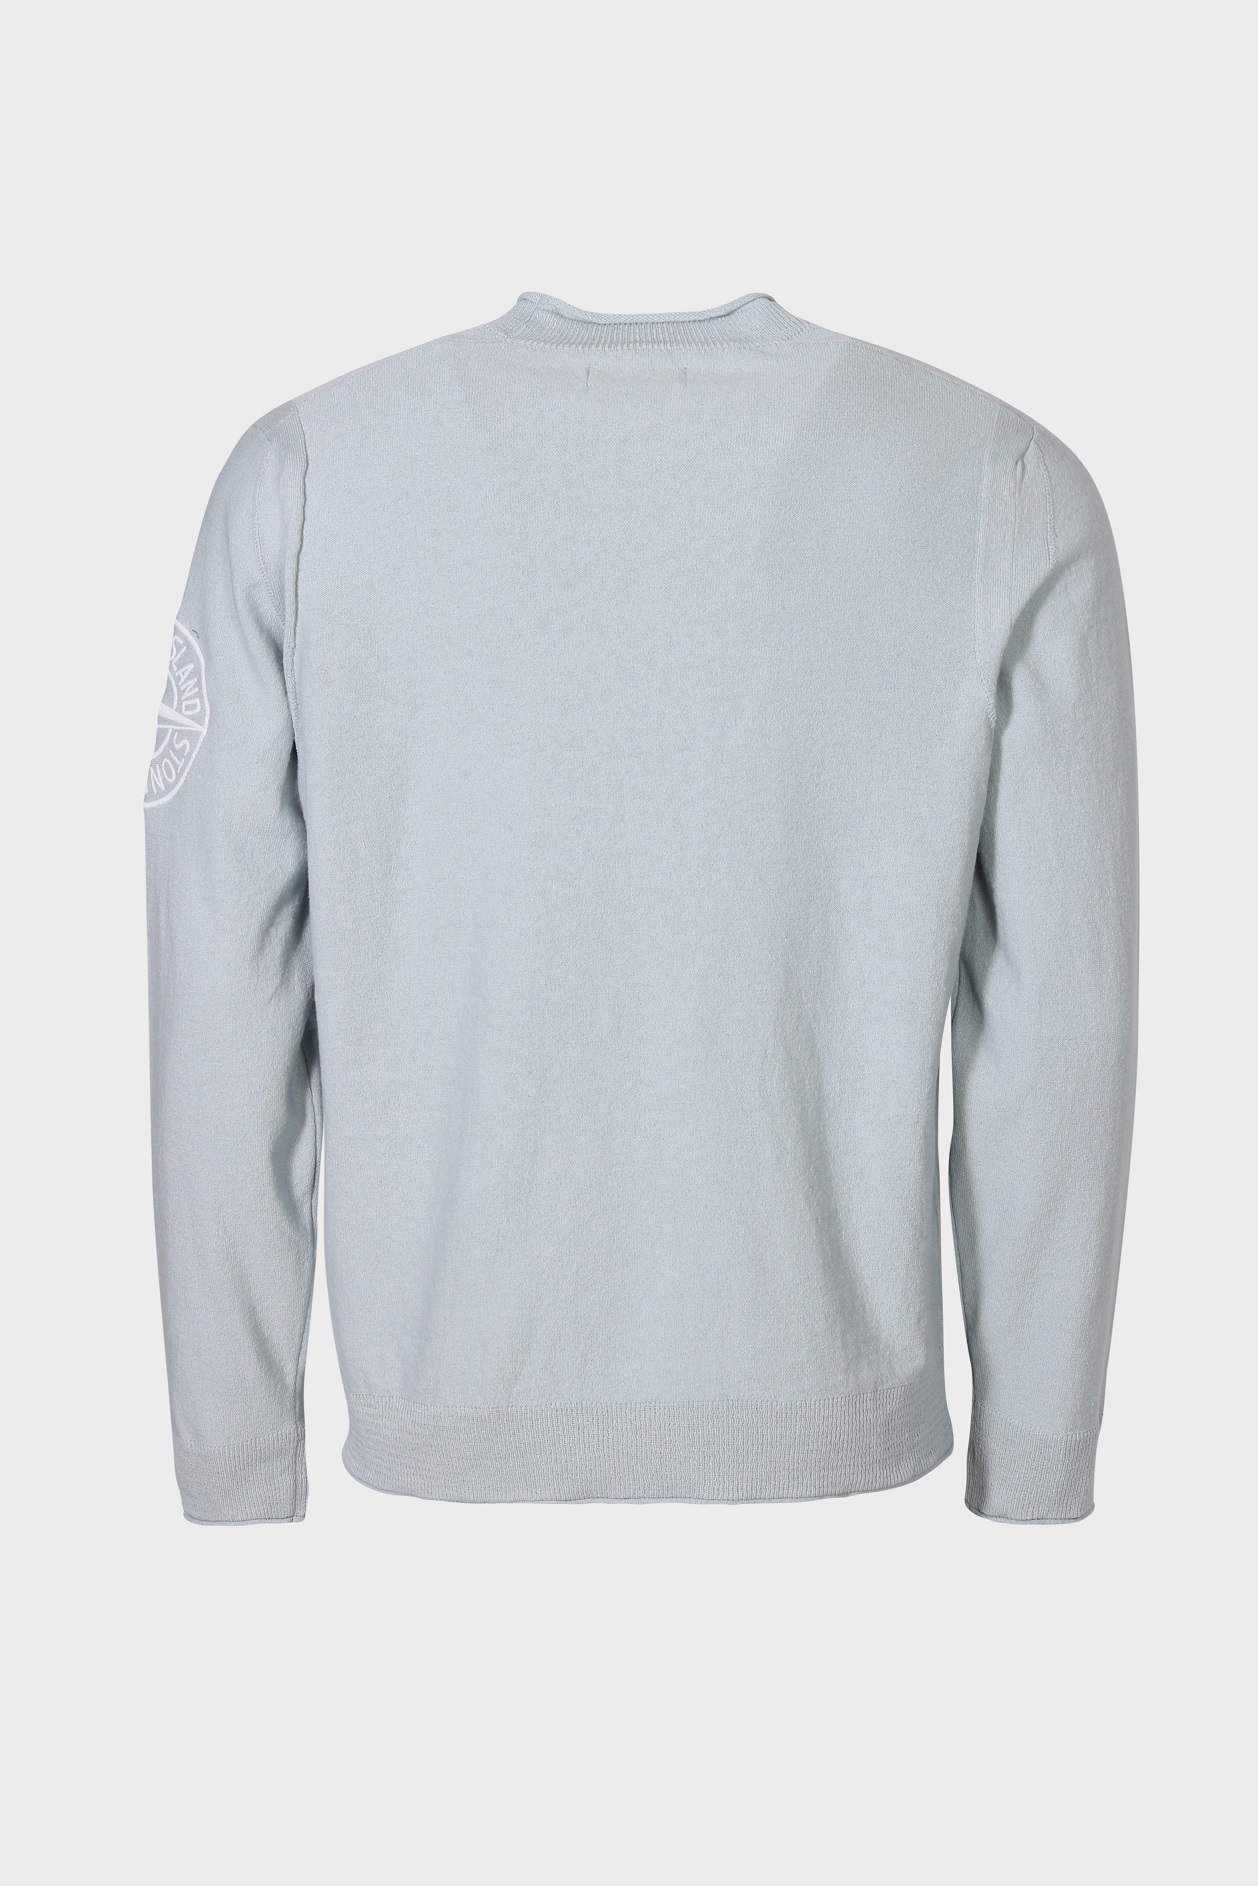 STONE ISLAND Cotton Knit Pullover in Sky Blue 2XL